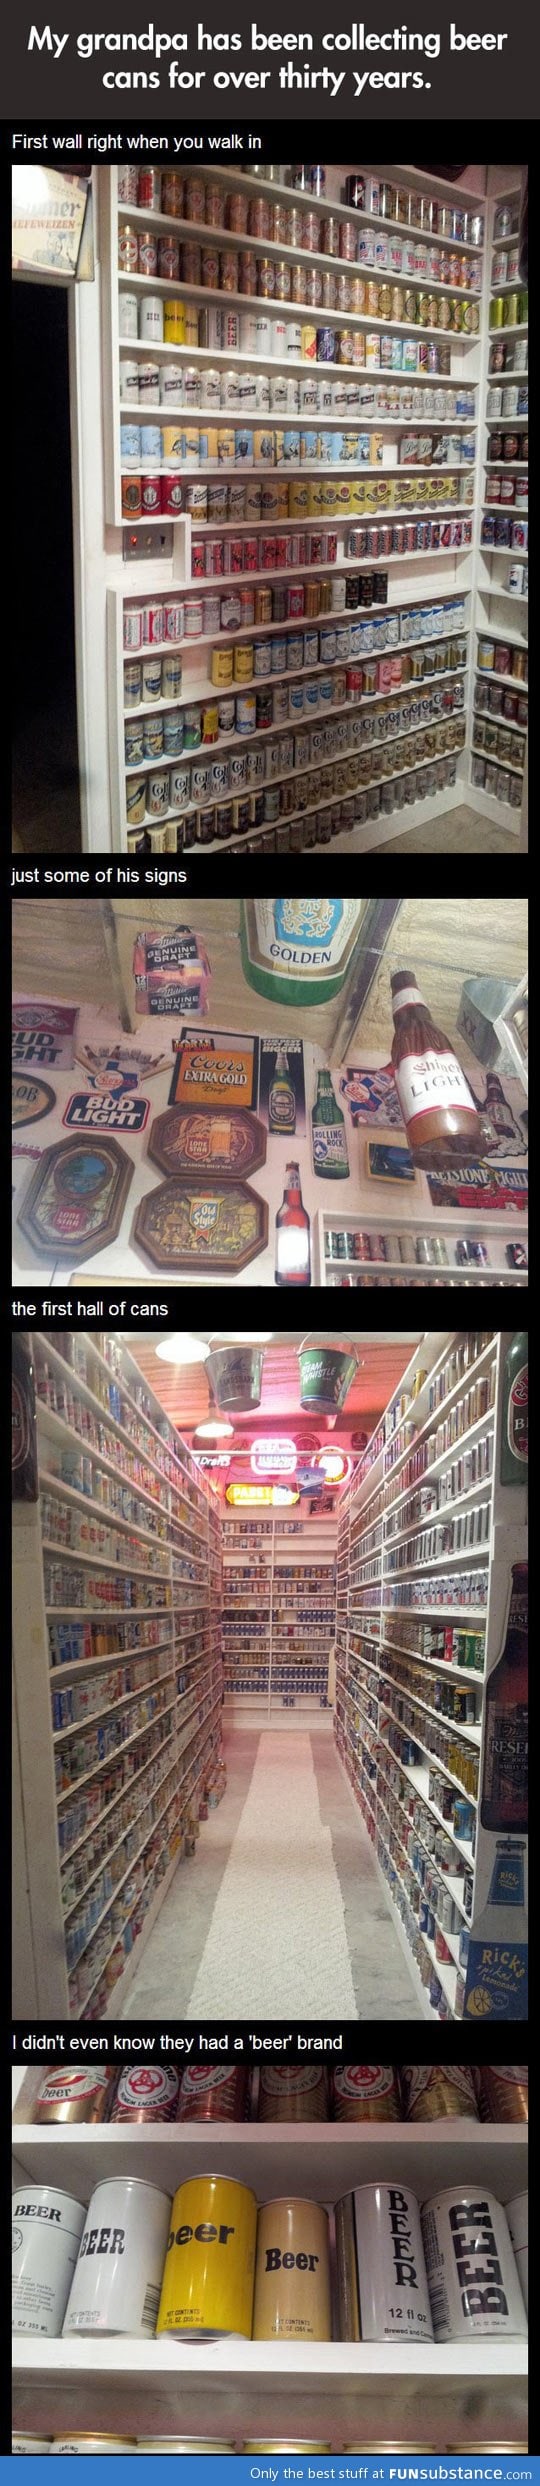 30 Years of Collecting Beer Cans